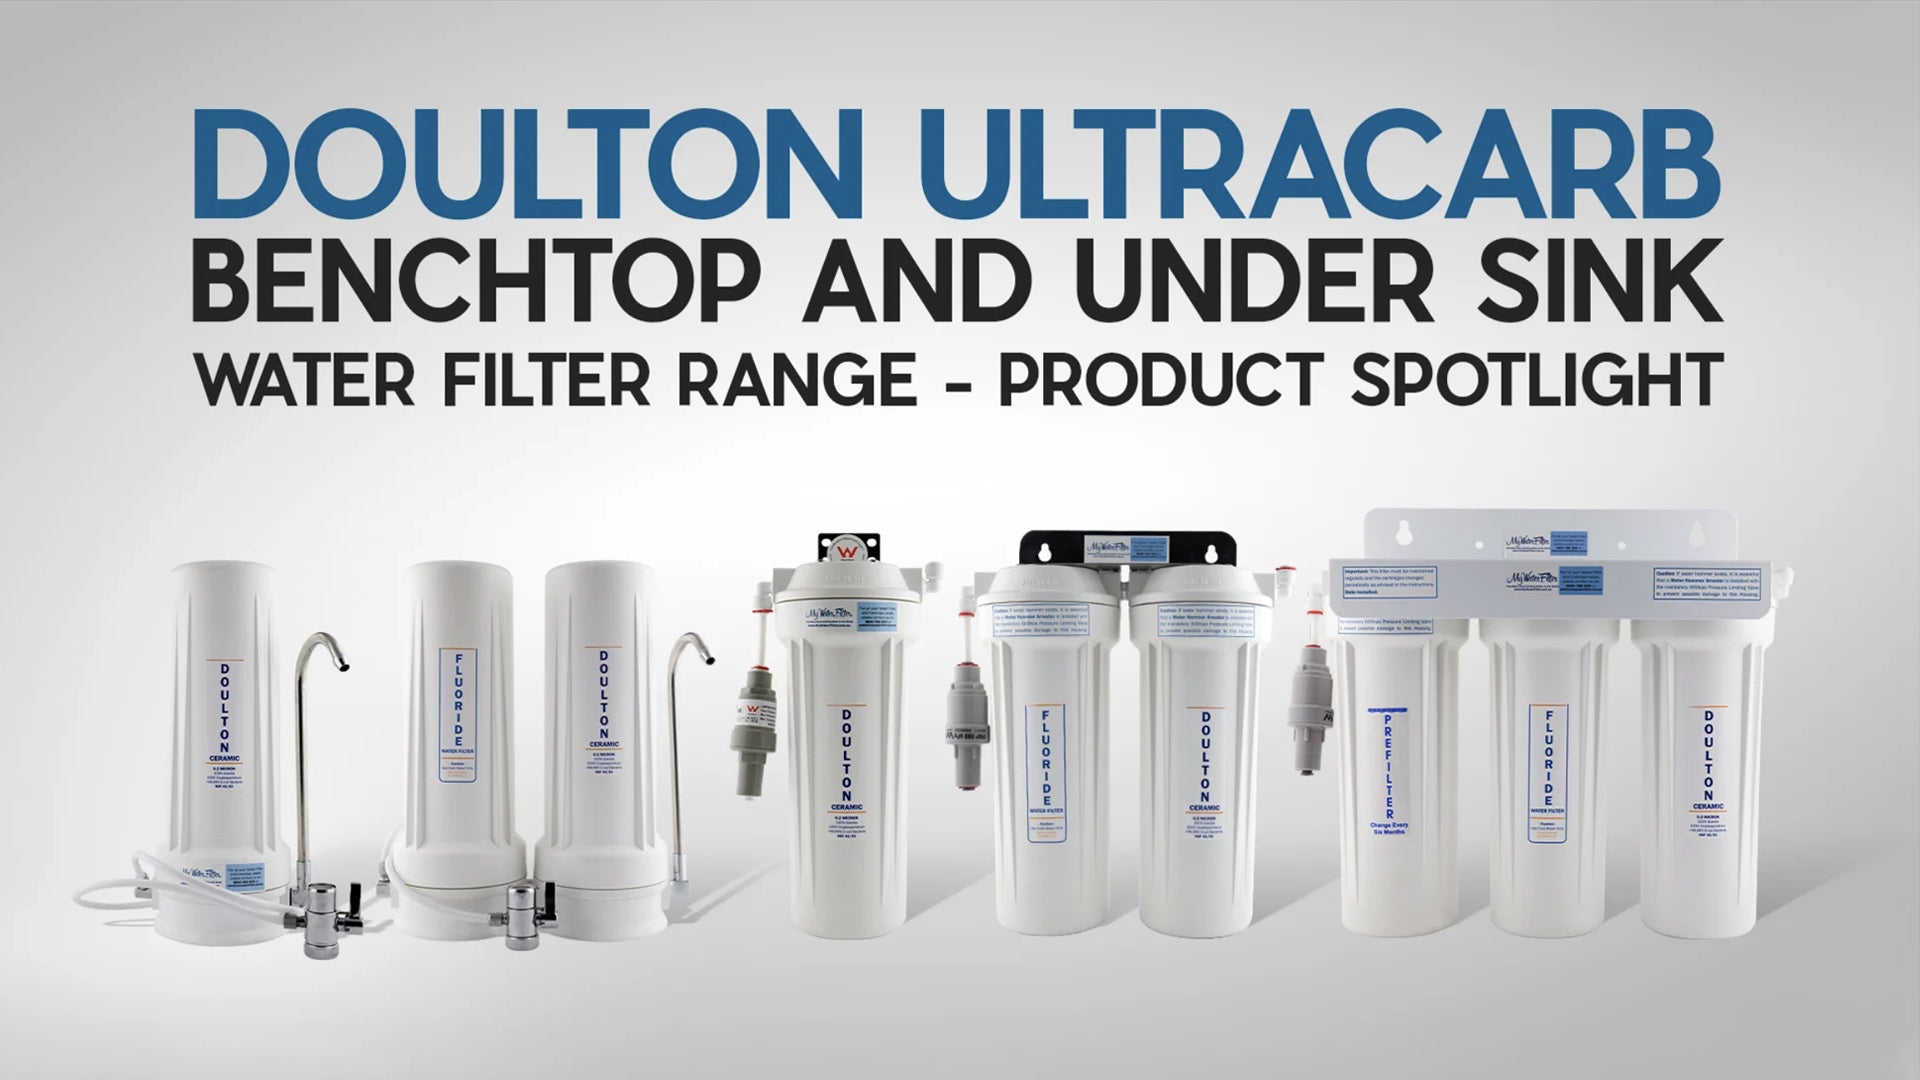 Doulton Ultracarb Benchtop and Under Sink Water Filter Range - Product Spotlight